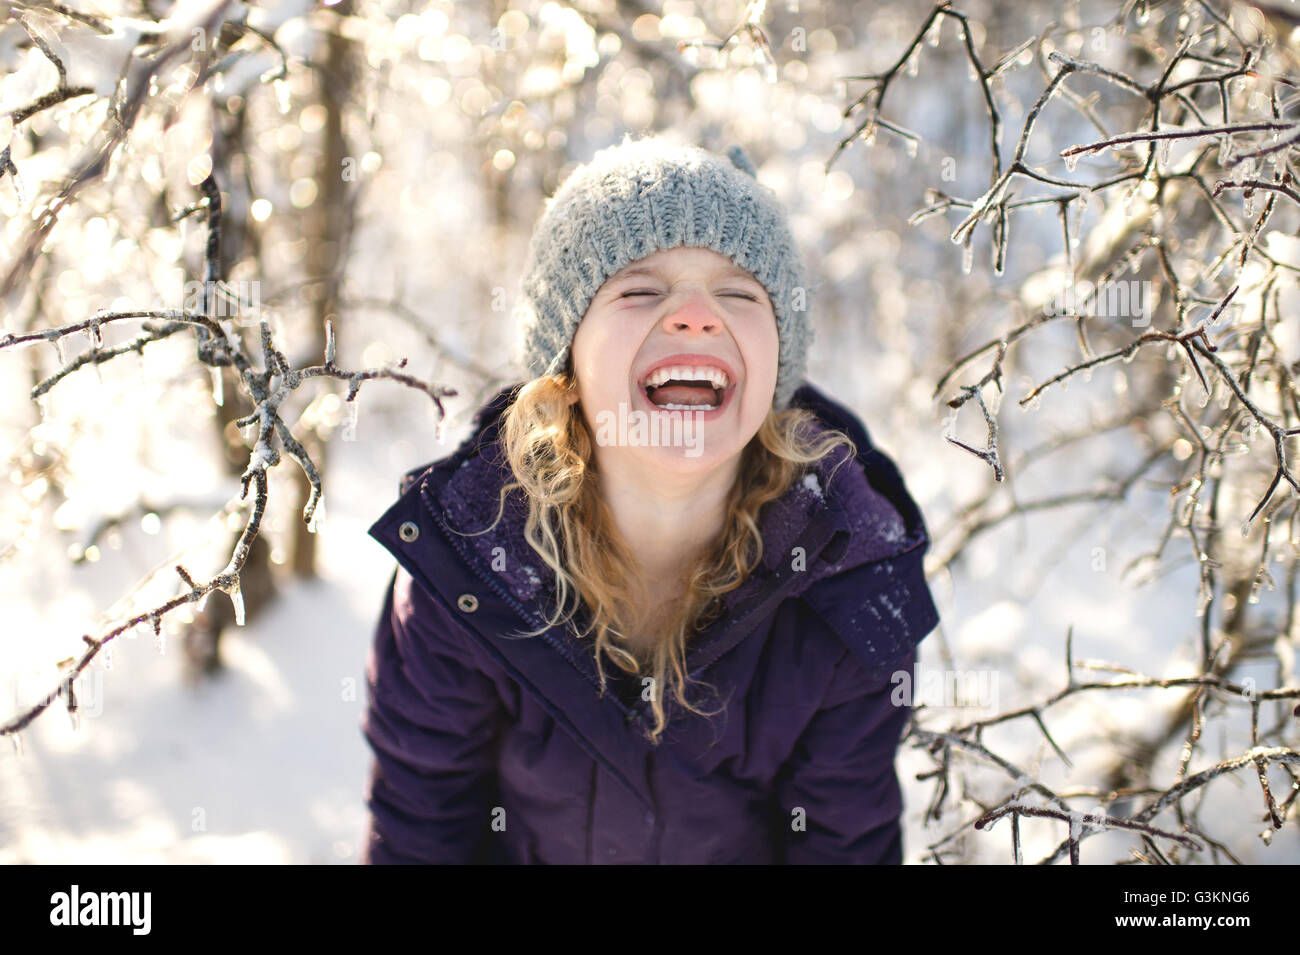 Portrait of young girl laughing, in snowy landscape Stock Photo